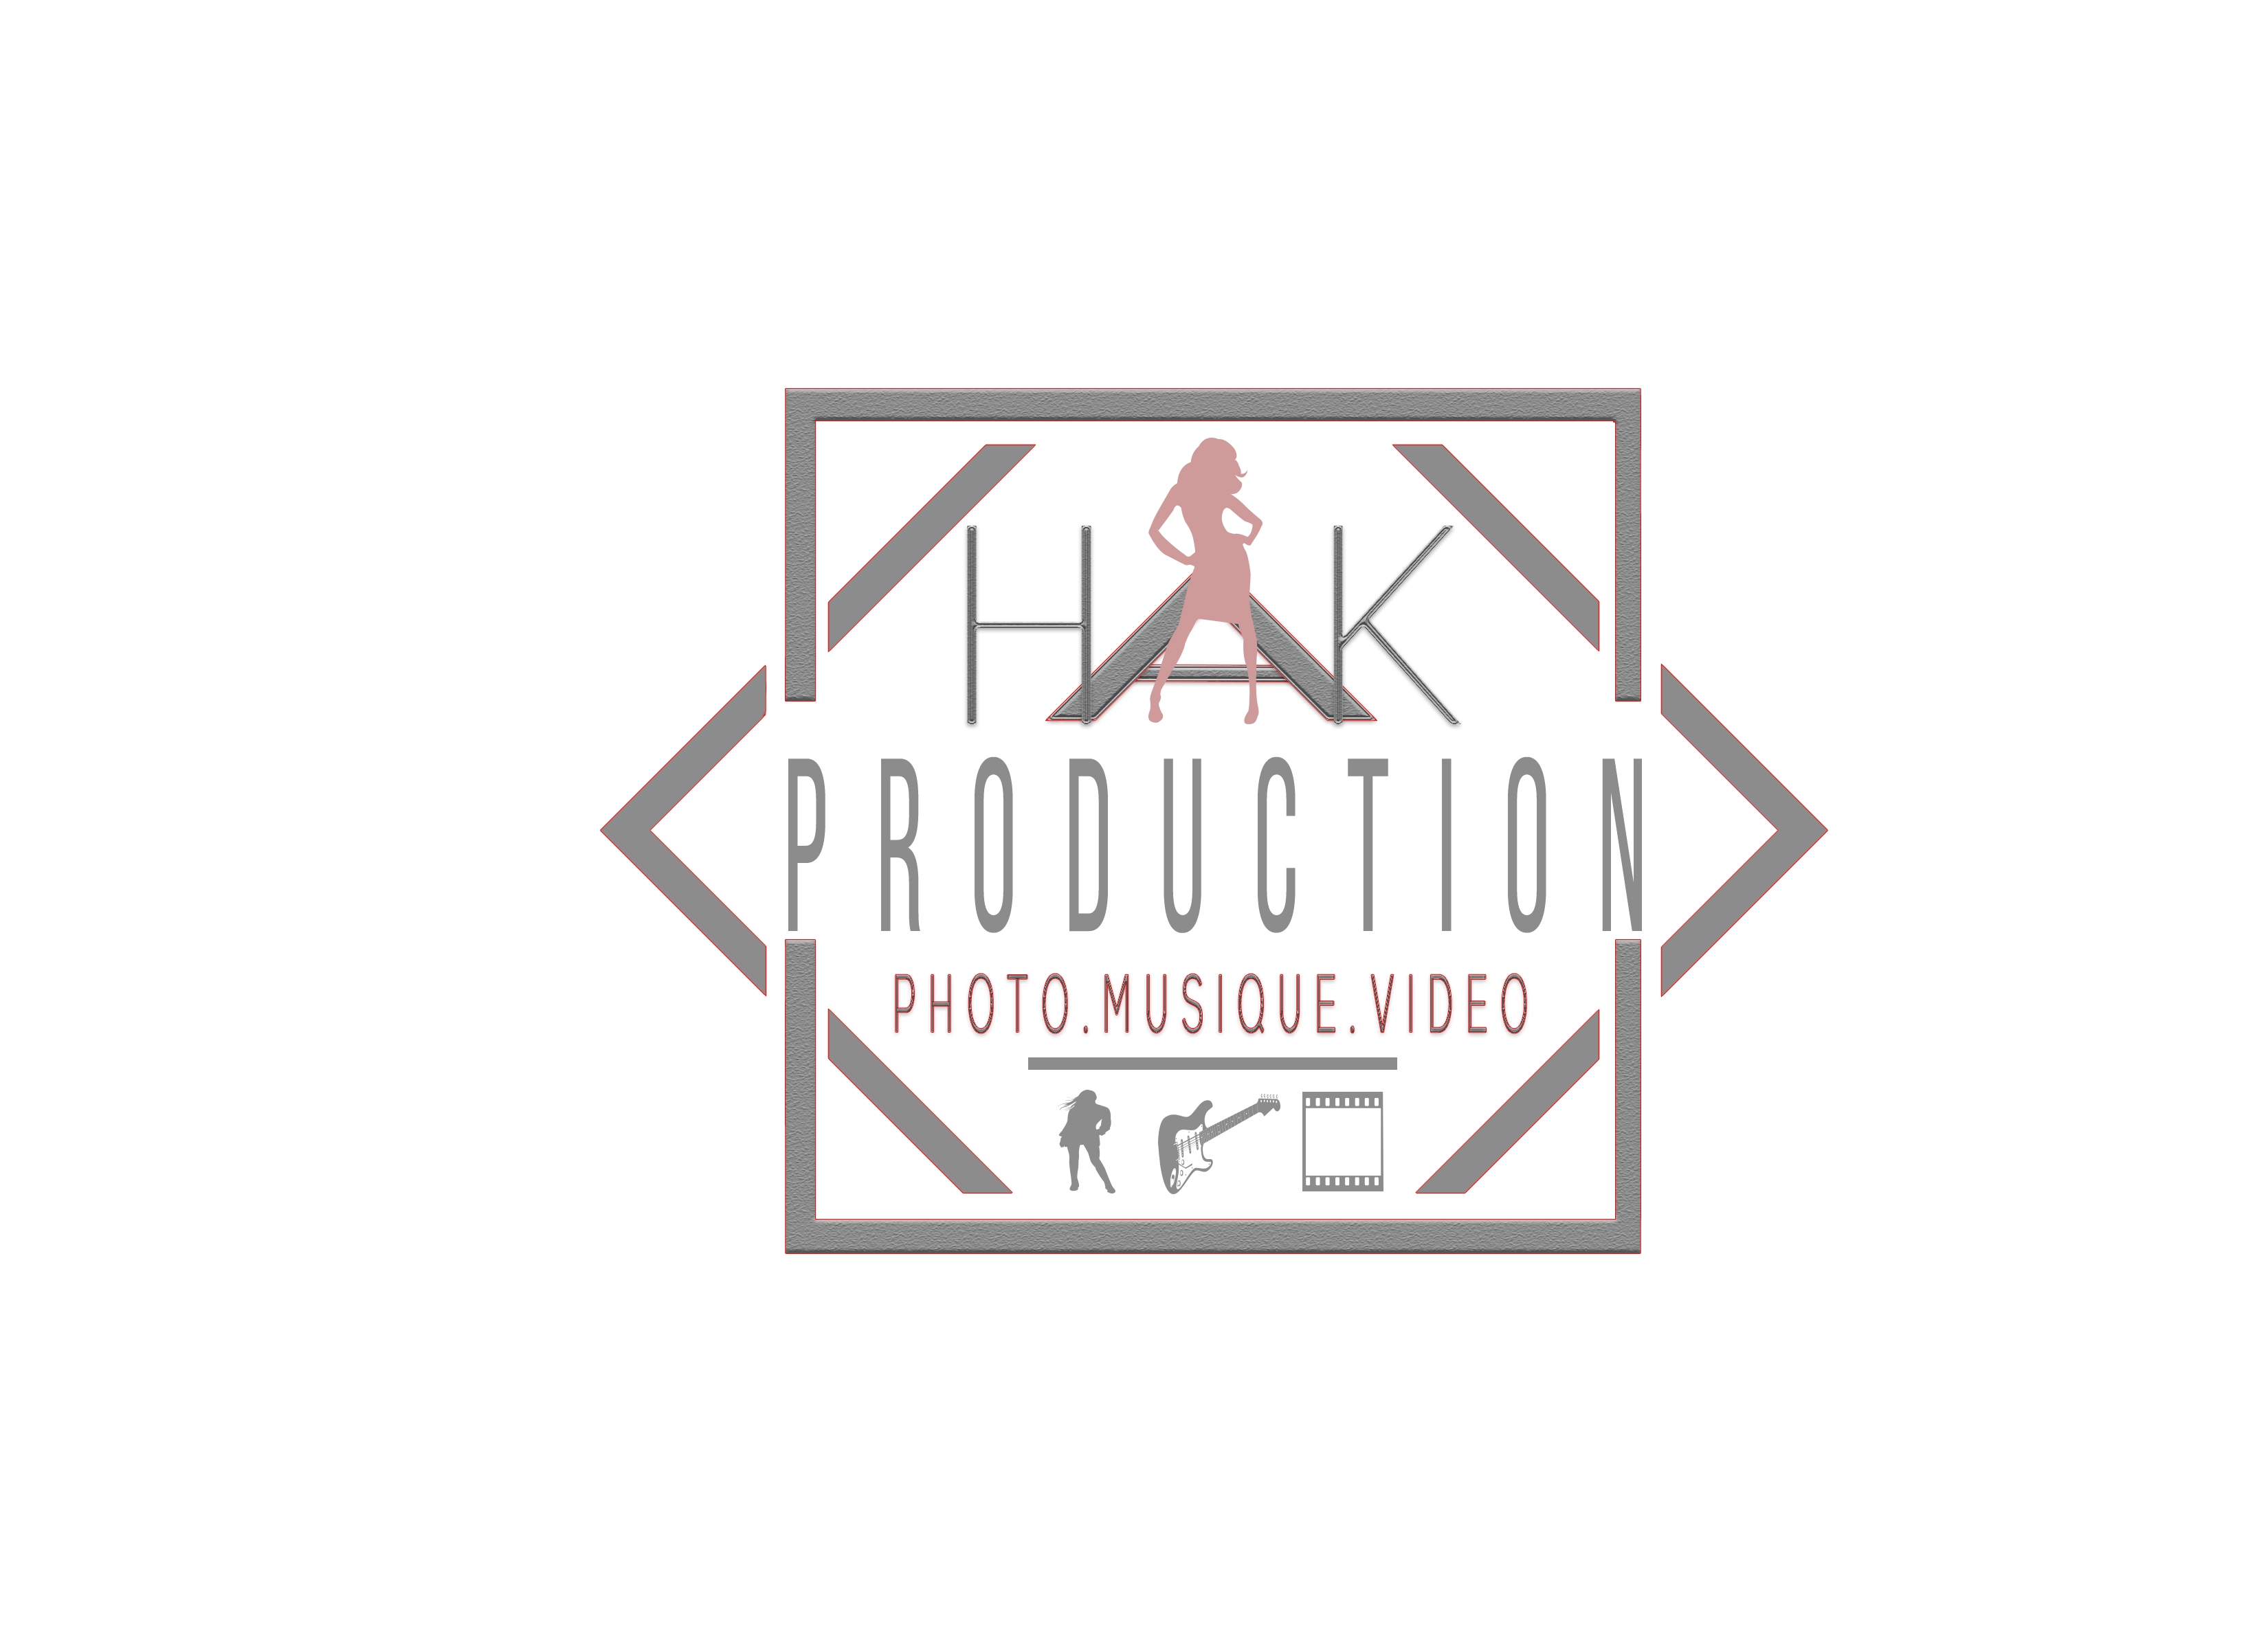 Galerie hakproduction